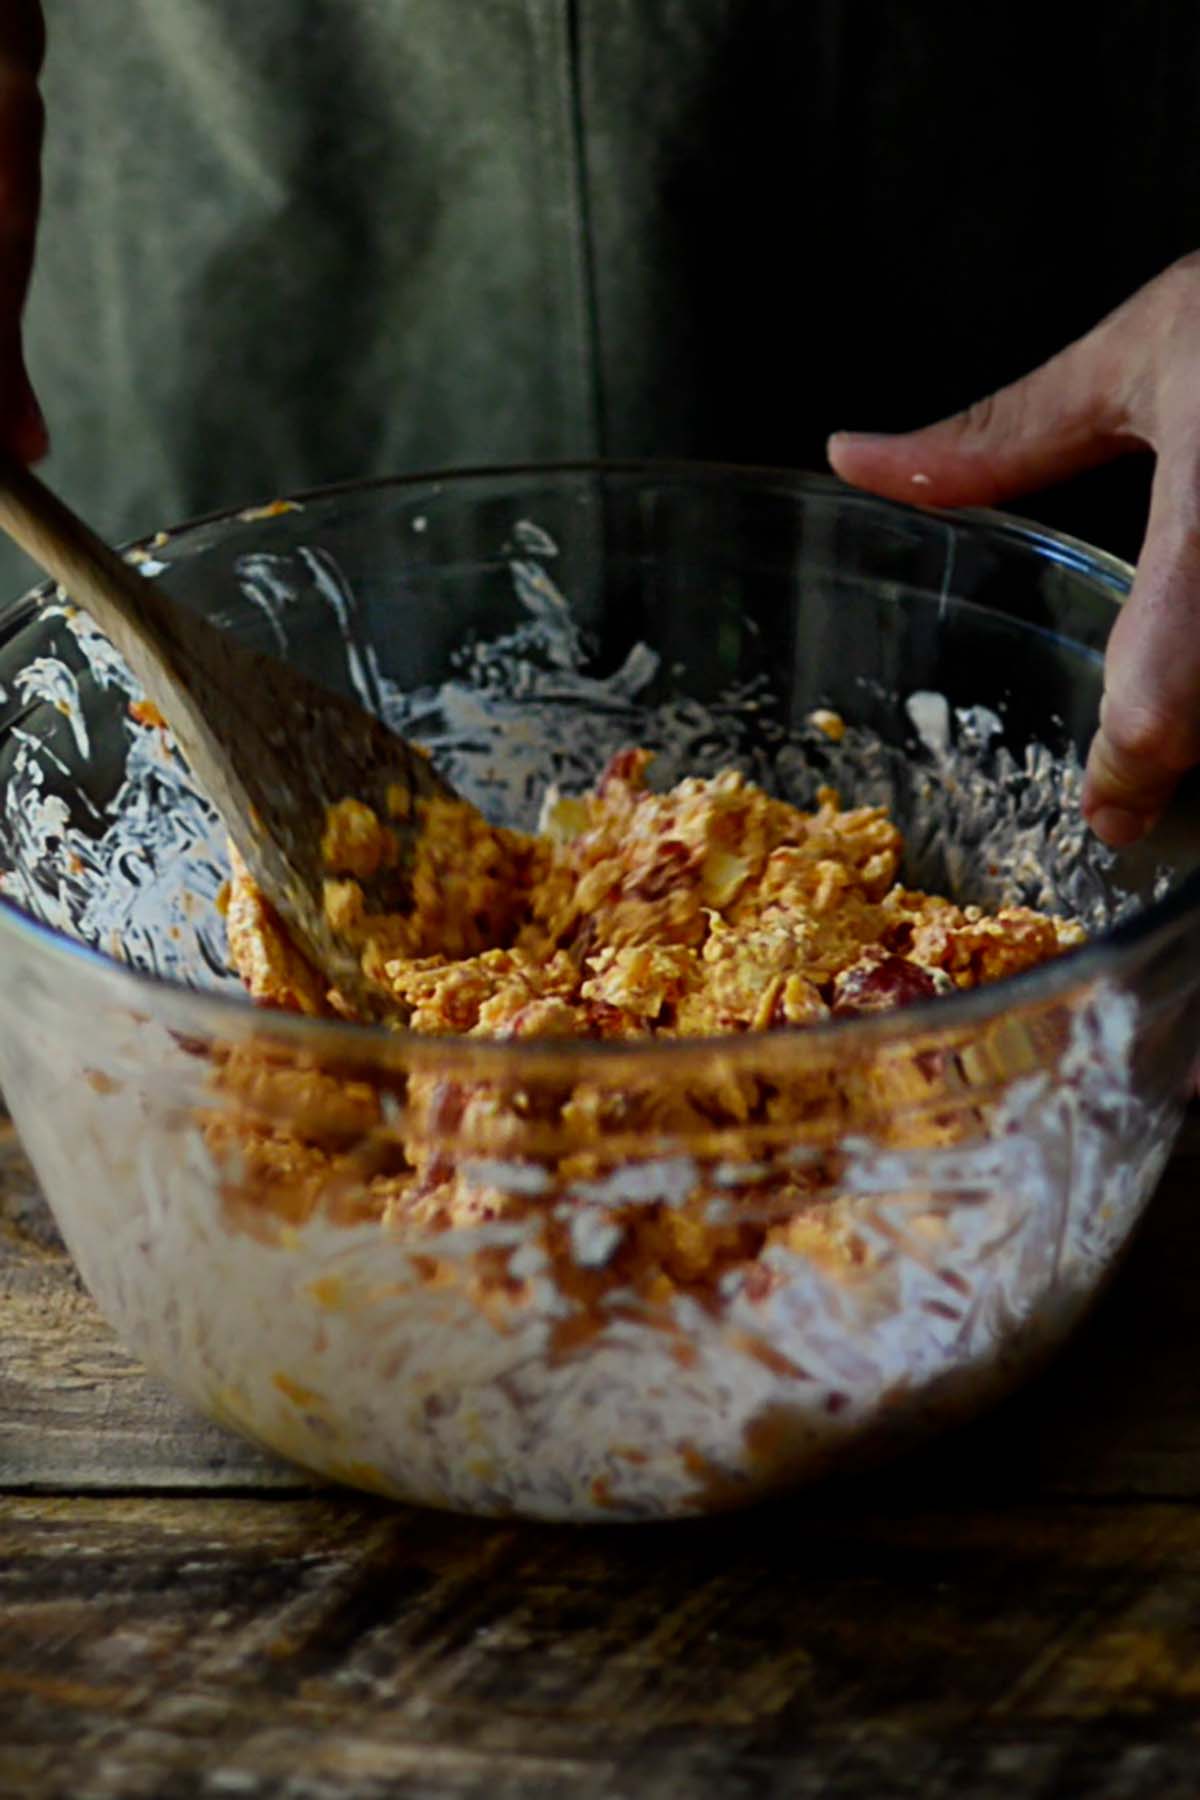 Pimento cheese being mixed in a large glass mixing bowl.